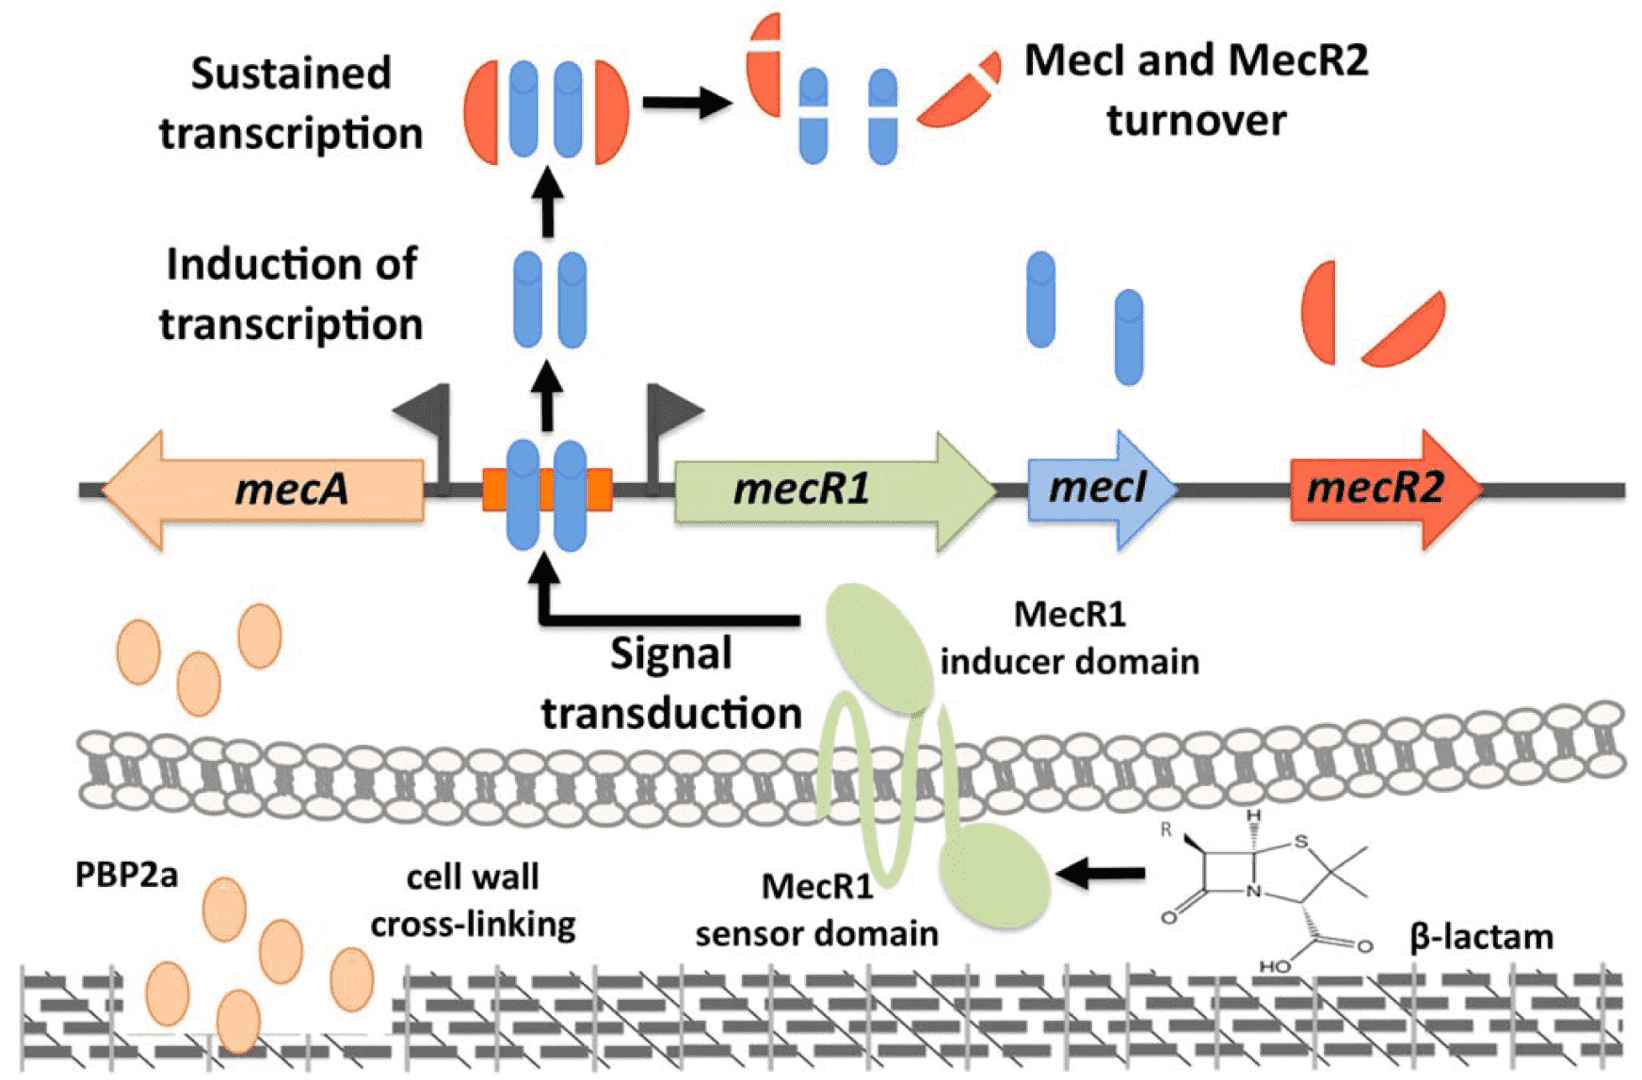 Model for the mecA induction by MecR1-MecI-MecR2.